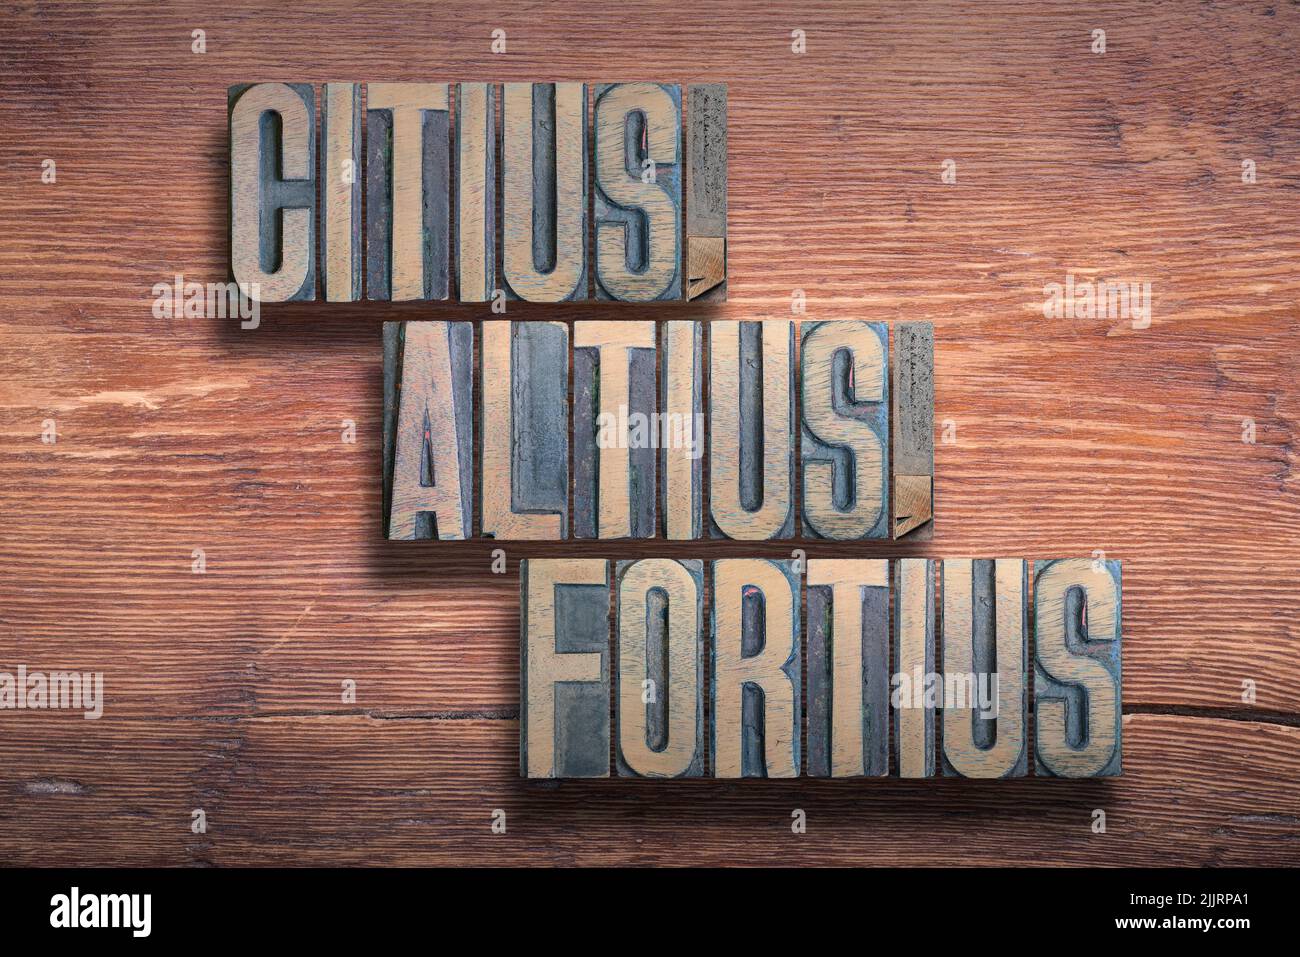 citius, altius, fortius ancient Latin saying meaning Faster, Higher, Stronger combined on vintage varnished wooden surface Stock Photo